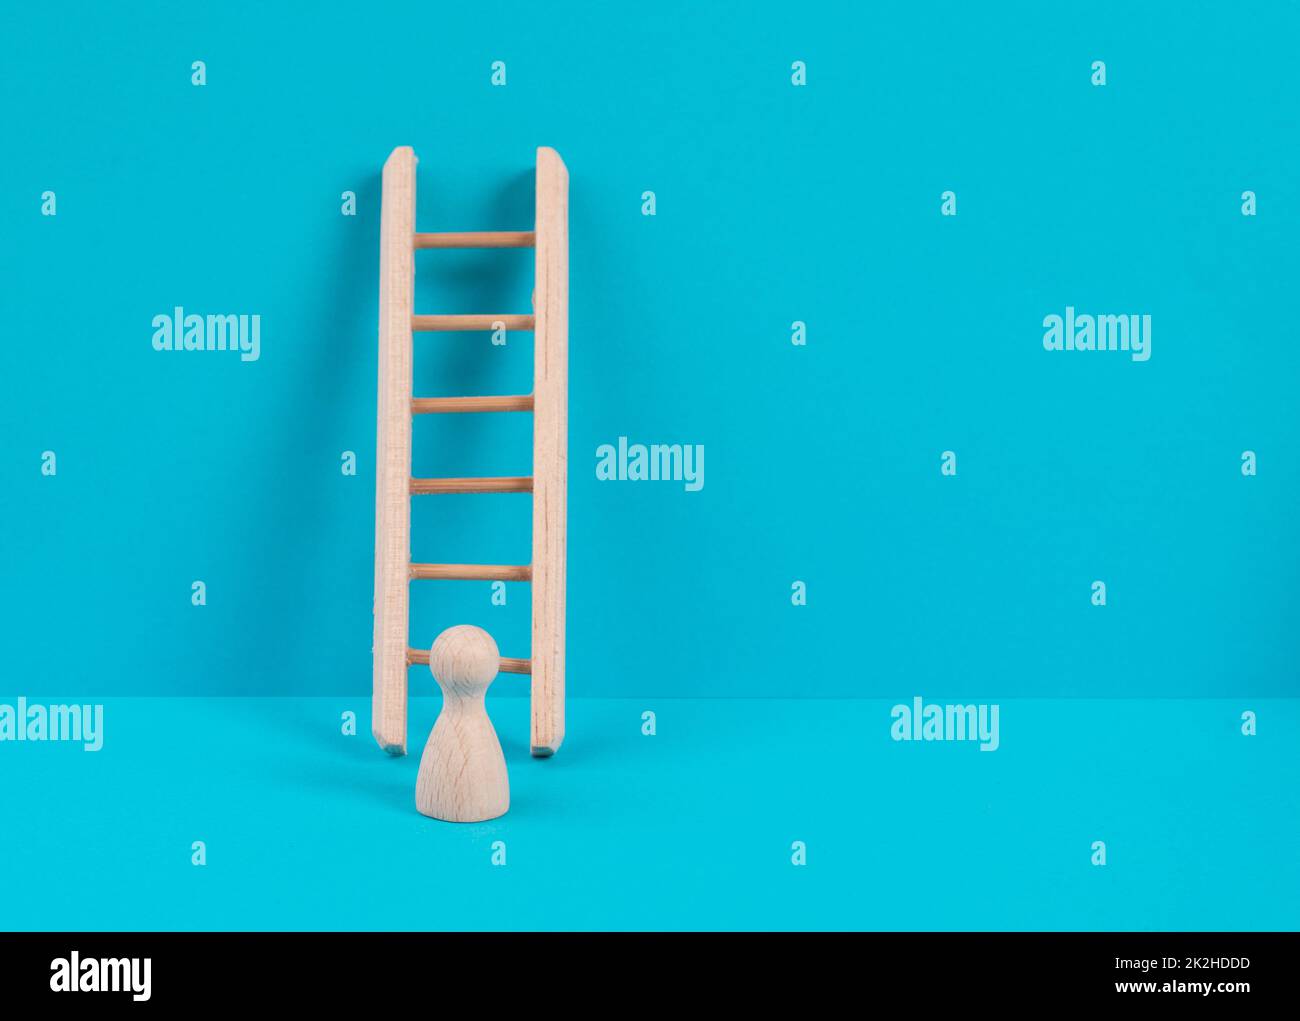 Man is standing next to a ladder, climbing up in career, having a goal, brainstorming for ideas, success strategy, taking a challenge, business concept Stock Photo